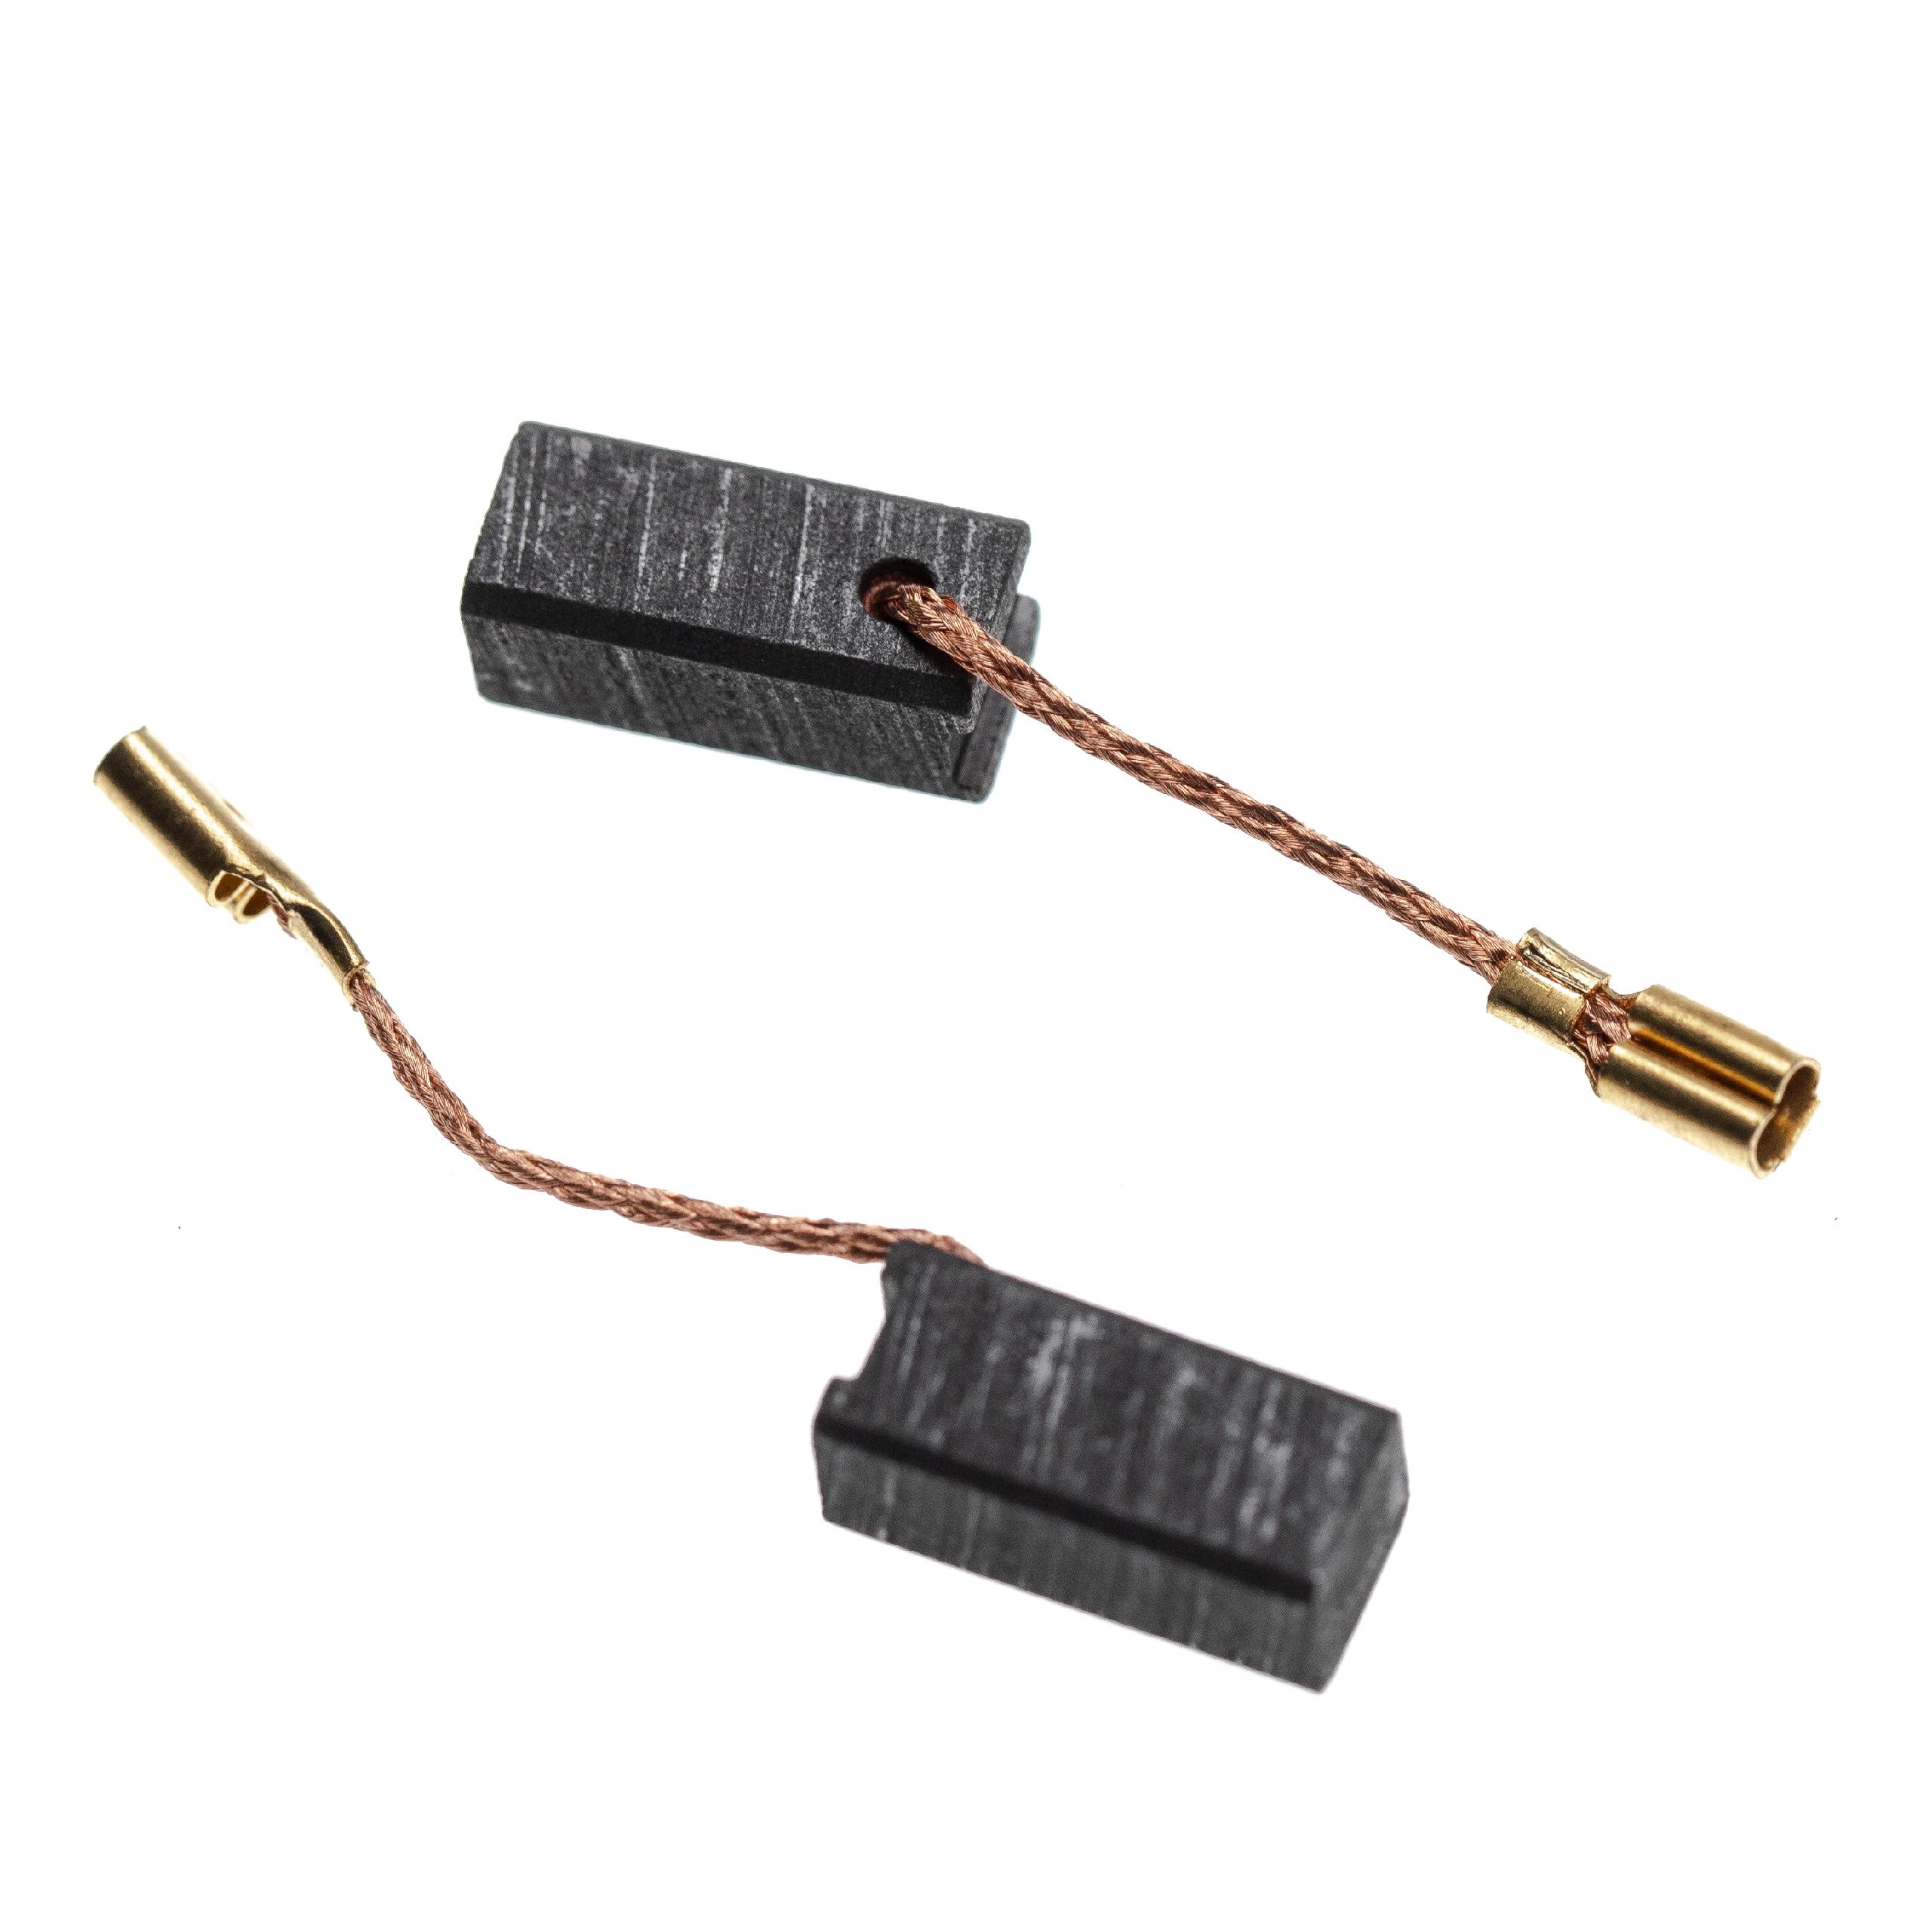 2x Carbon Brush as Replacement for Metabo 34301092 Electric Power Tools + Angled Connector, 14.3 x 63 x 63mm